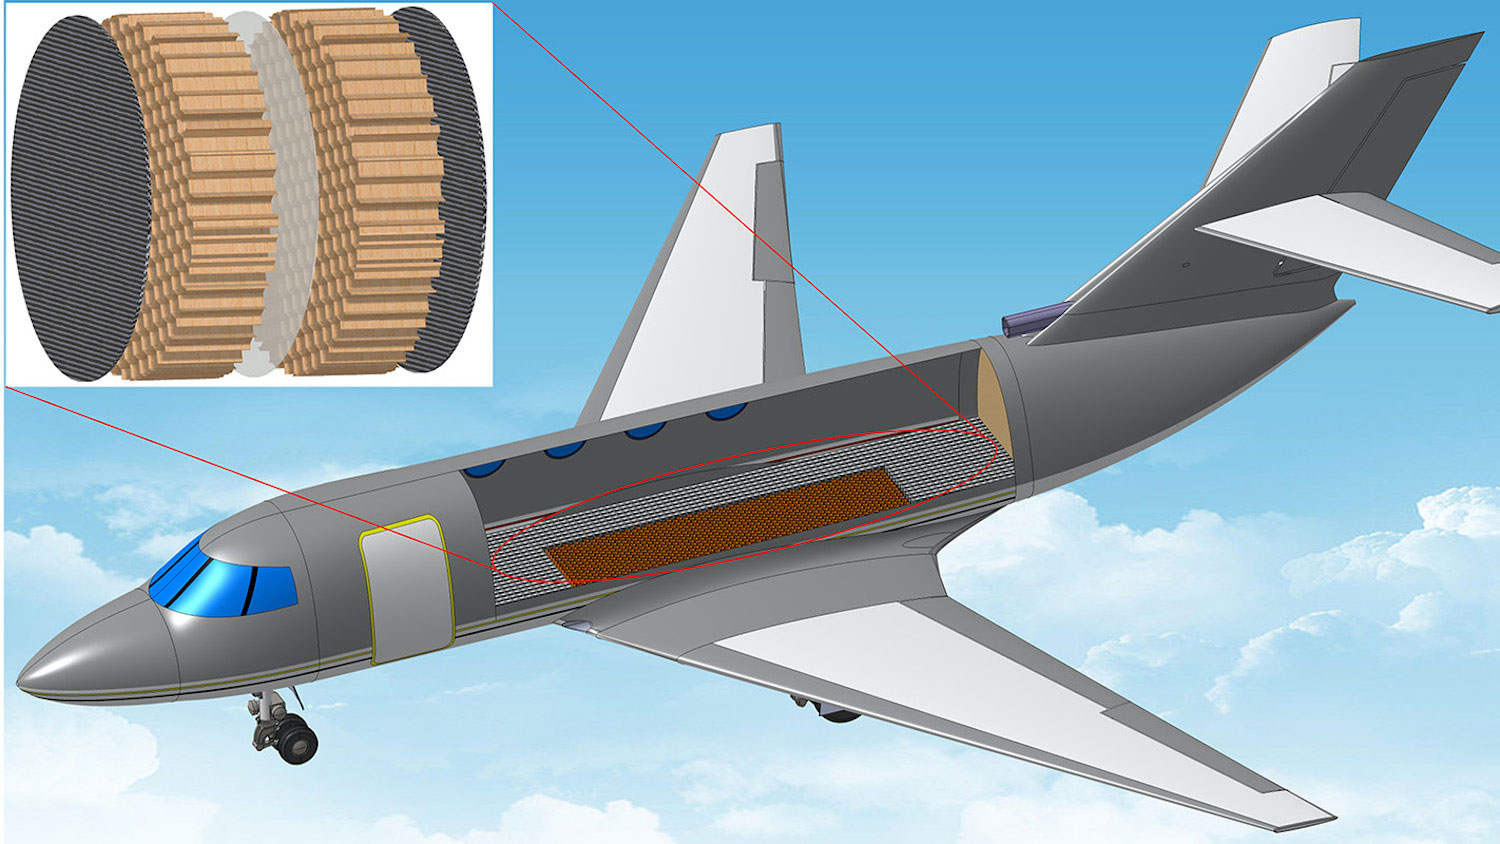 Image of a new airplane membrane design